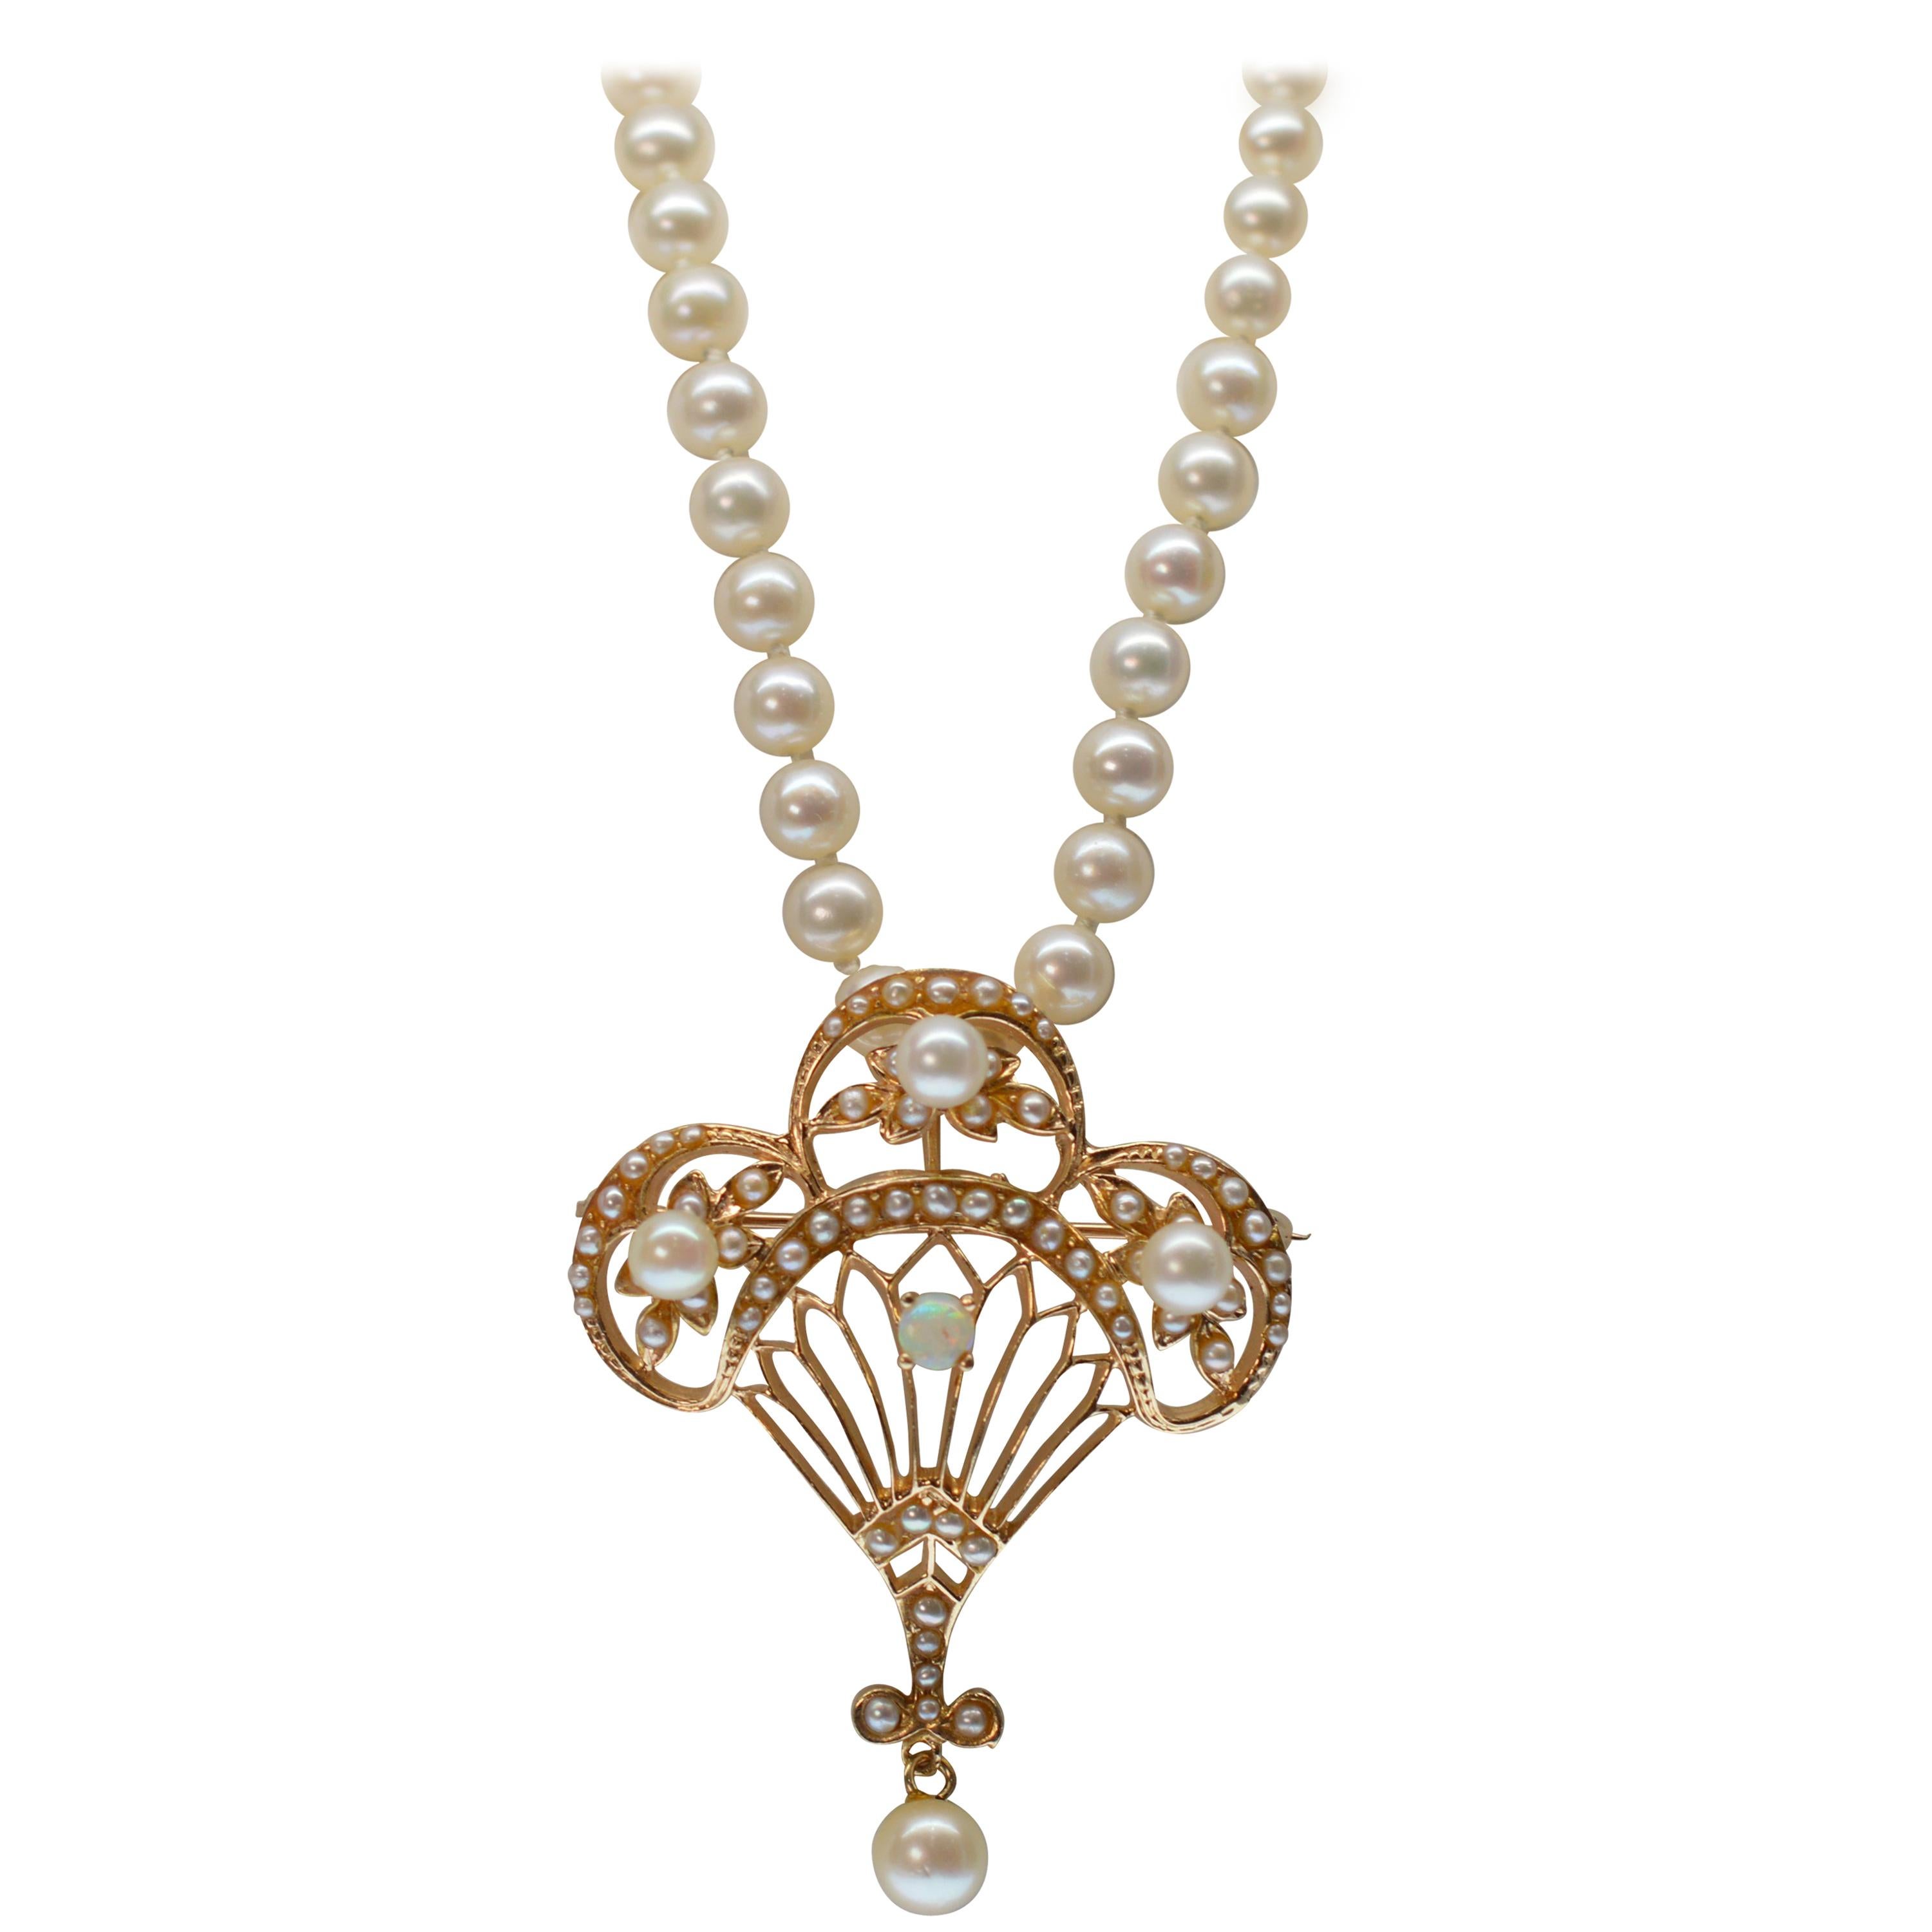 Pearl Necklace with Fancy Antique Style 14K Gold, Opal & Pearl Pendant Brooch 